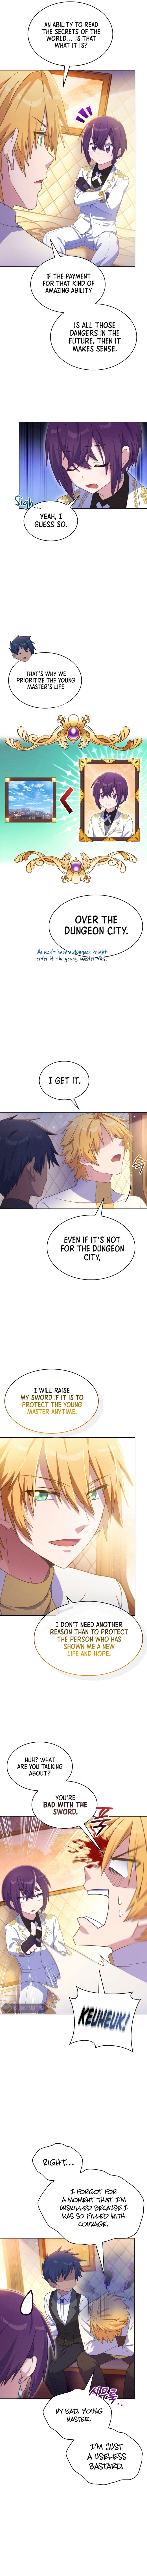 never-die-extra-chap-38-6